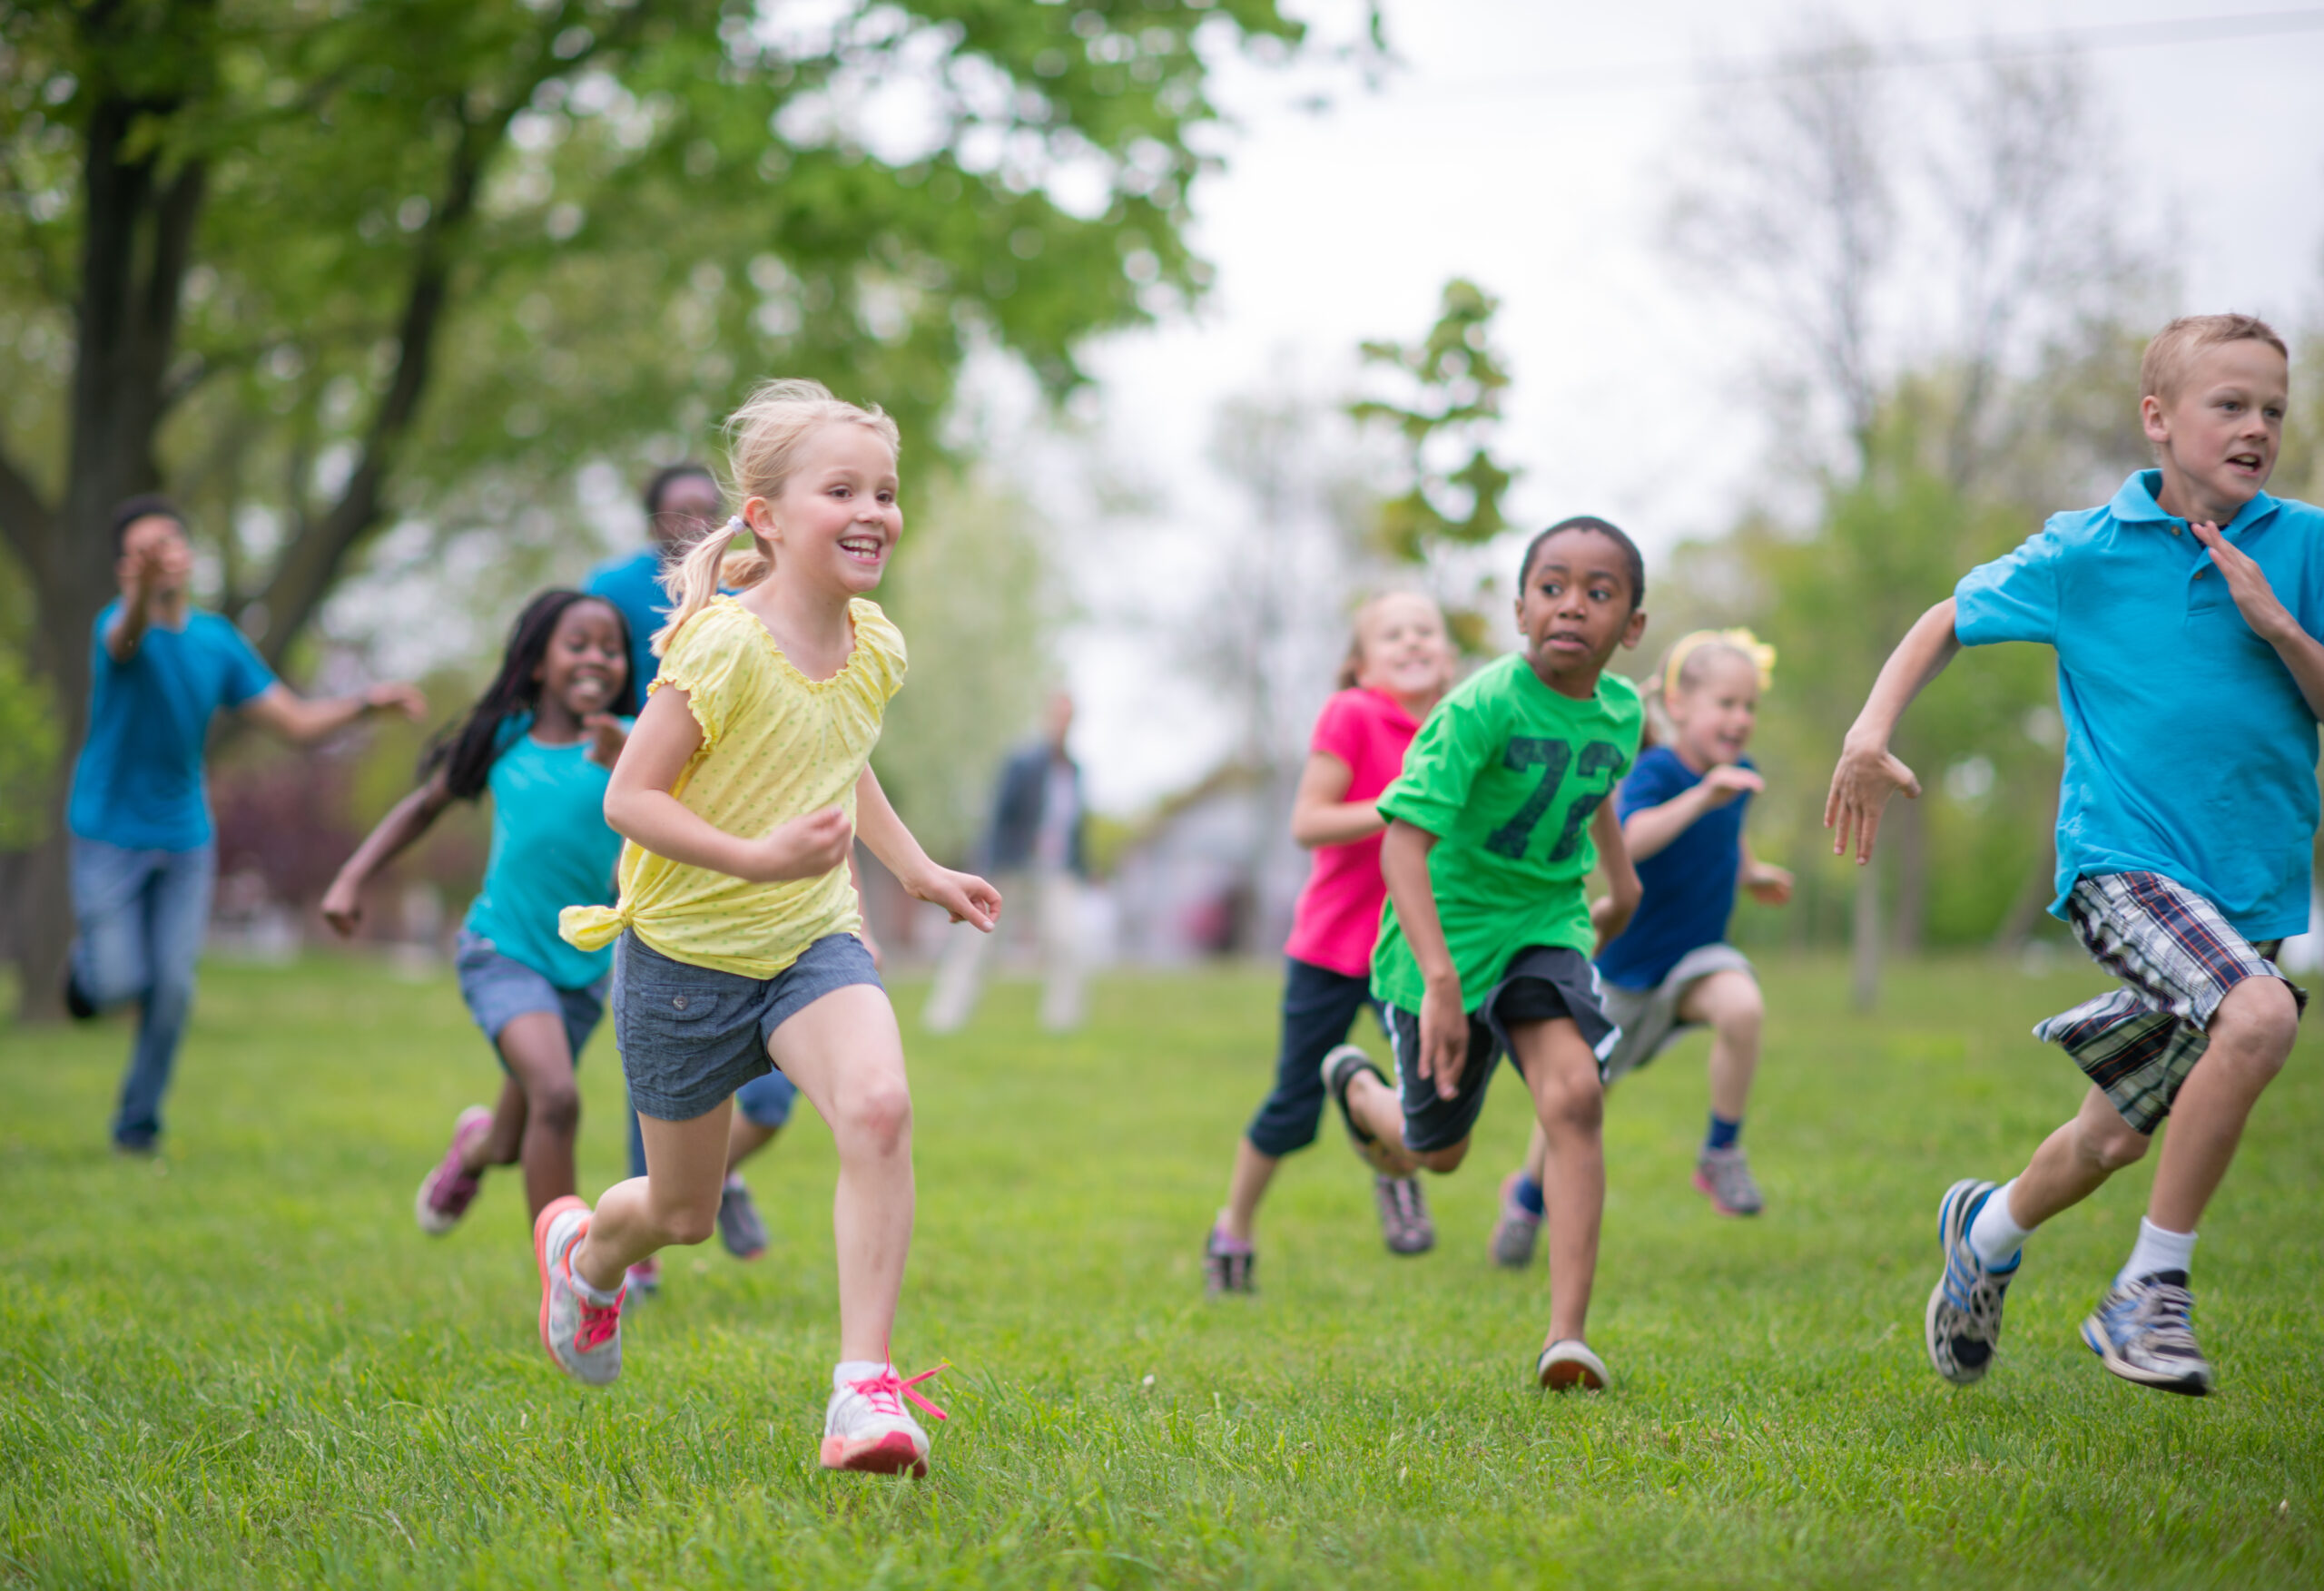 A photograph of a group of children running outdoors at a public park together. They are dressed casually on a summer's day.